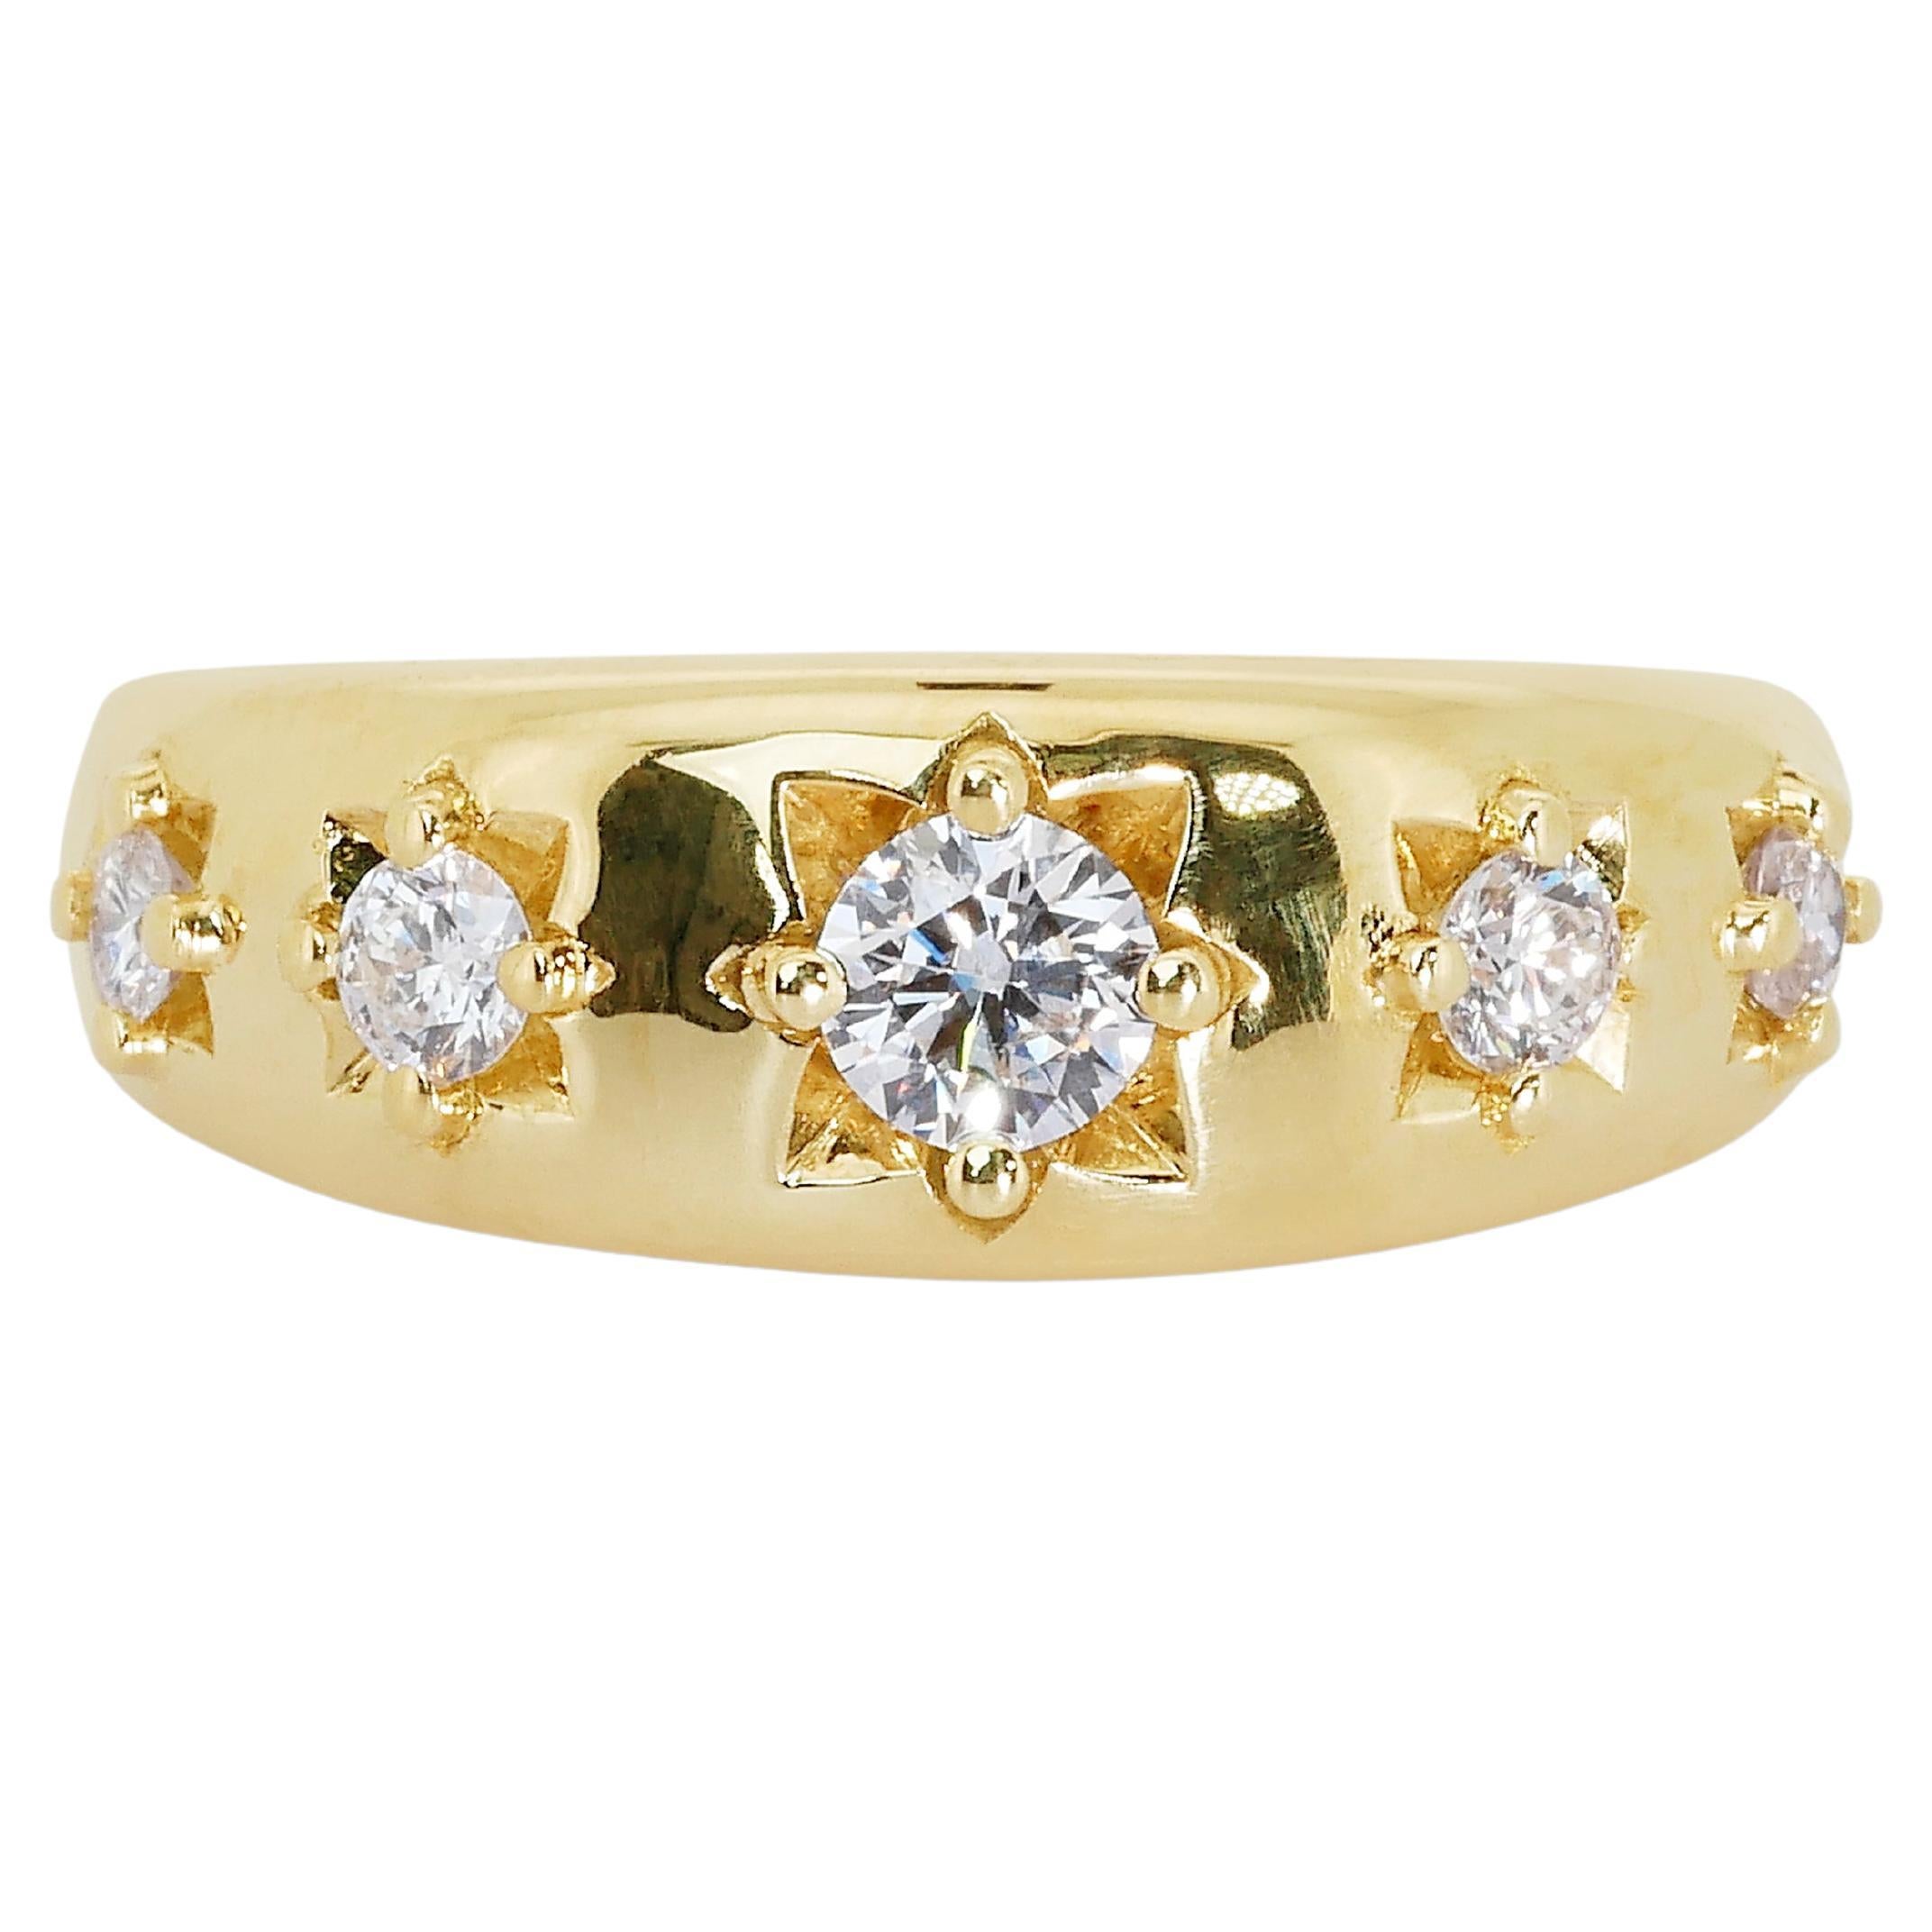 Marvelous 18k Yellow Gold Dome Ring w/ 0.55 Ct Natural Diamonds Aig Certificate